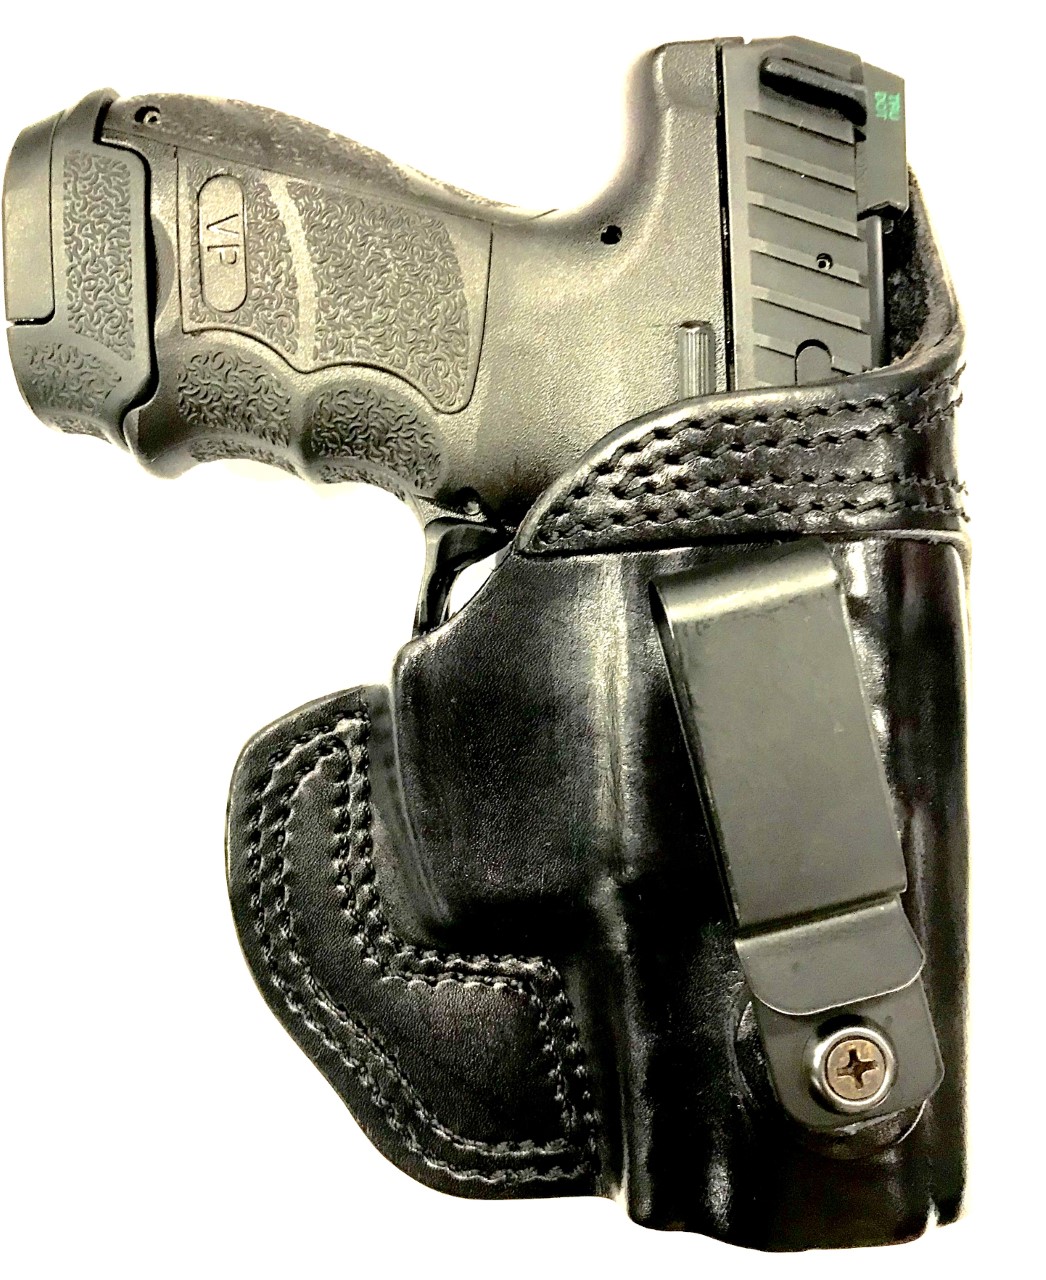 OWB Holster With Adjustable Clip - Athena's Armory